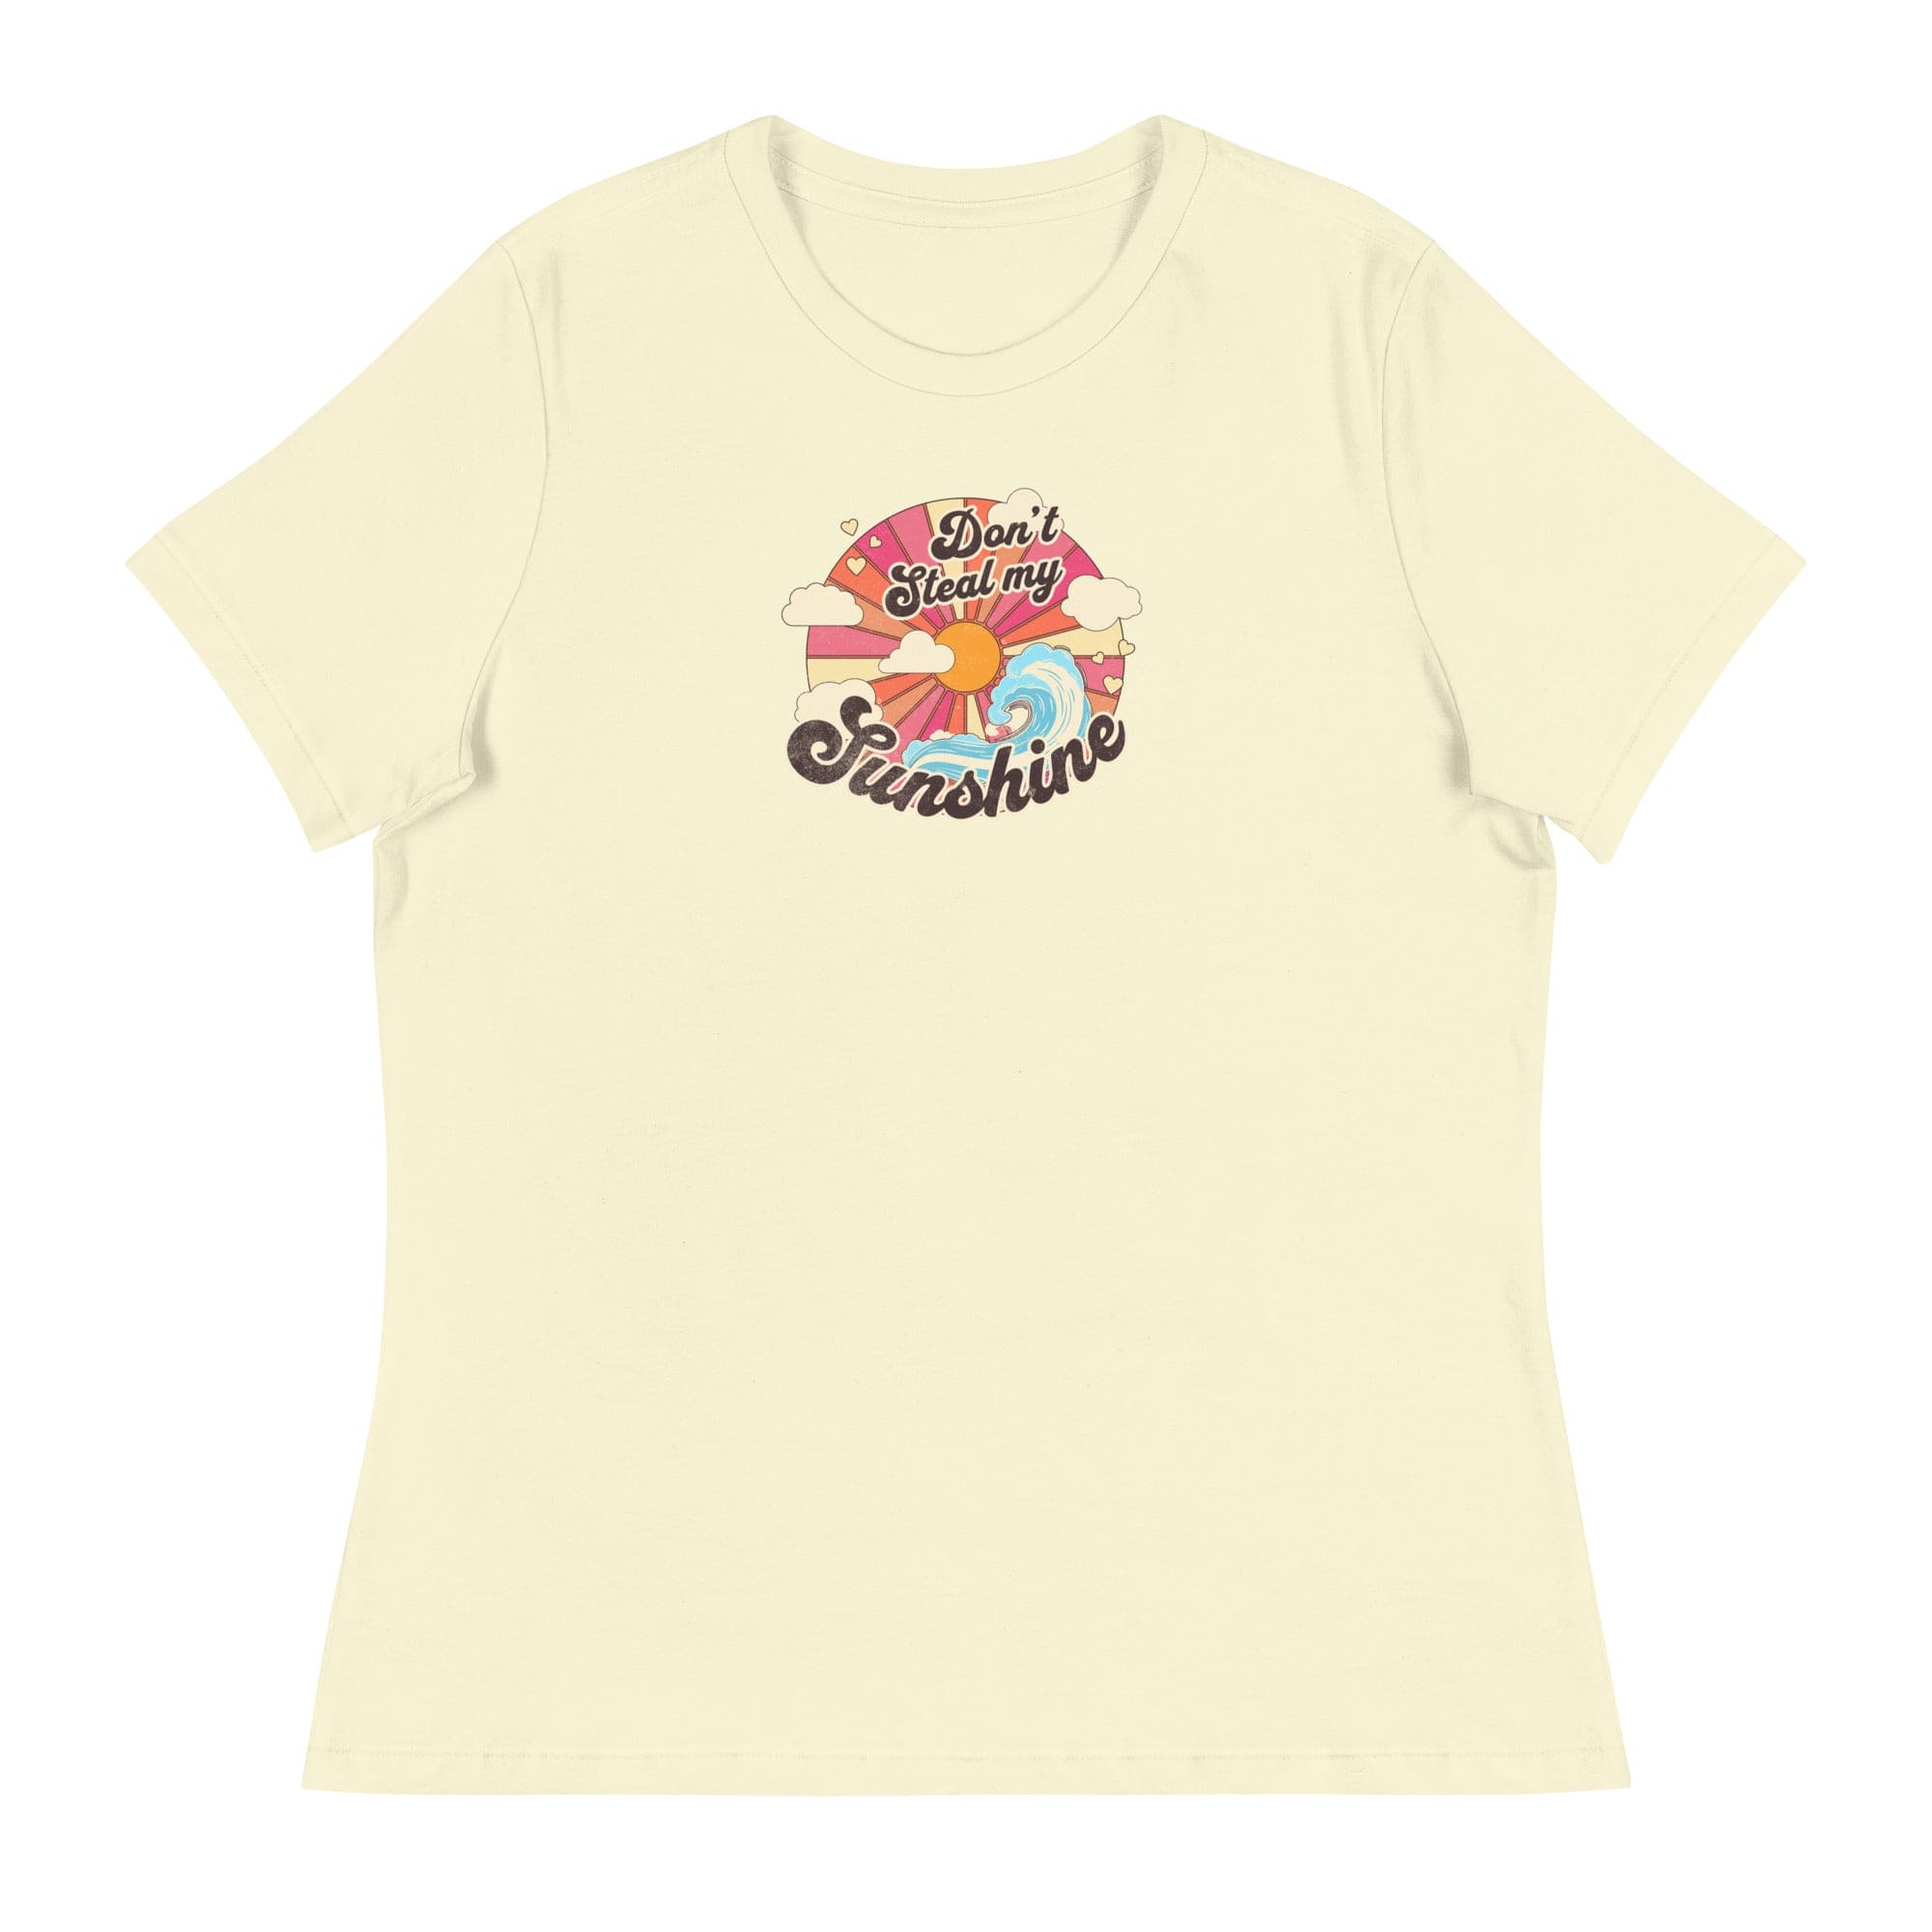 Don't Steal my Sunshine - Women's Relaxed T-Shirt